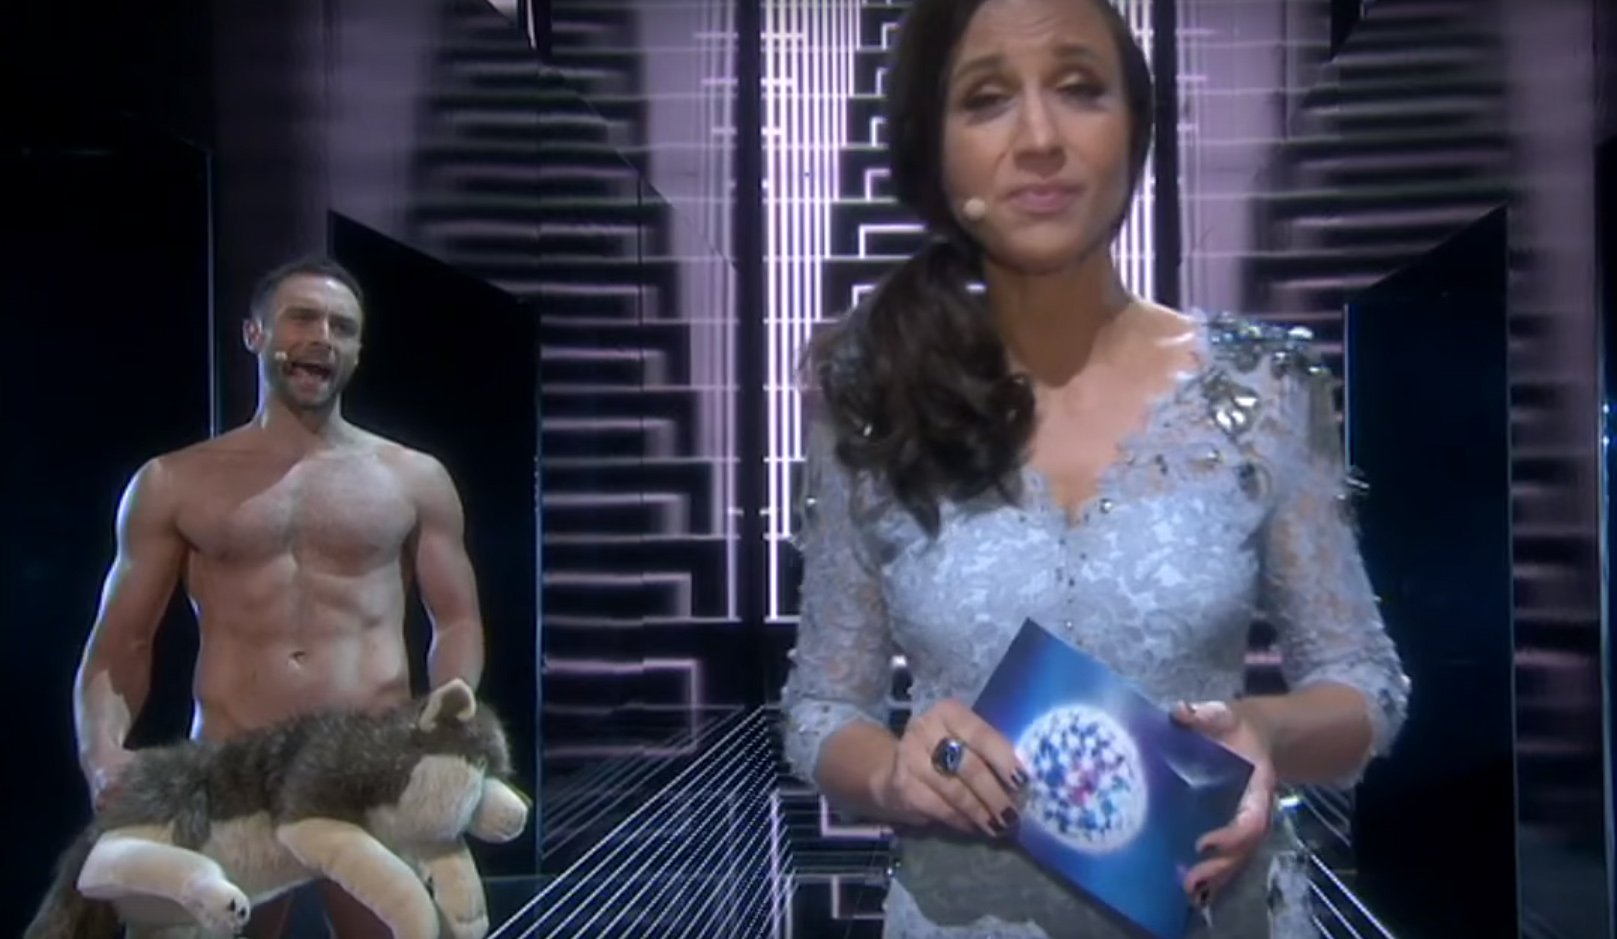 Eurovision S Måns Zelmerlöw Appears Naked On Stage Speaks Out Against Anti Gay Laws Attitude